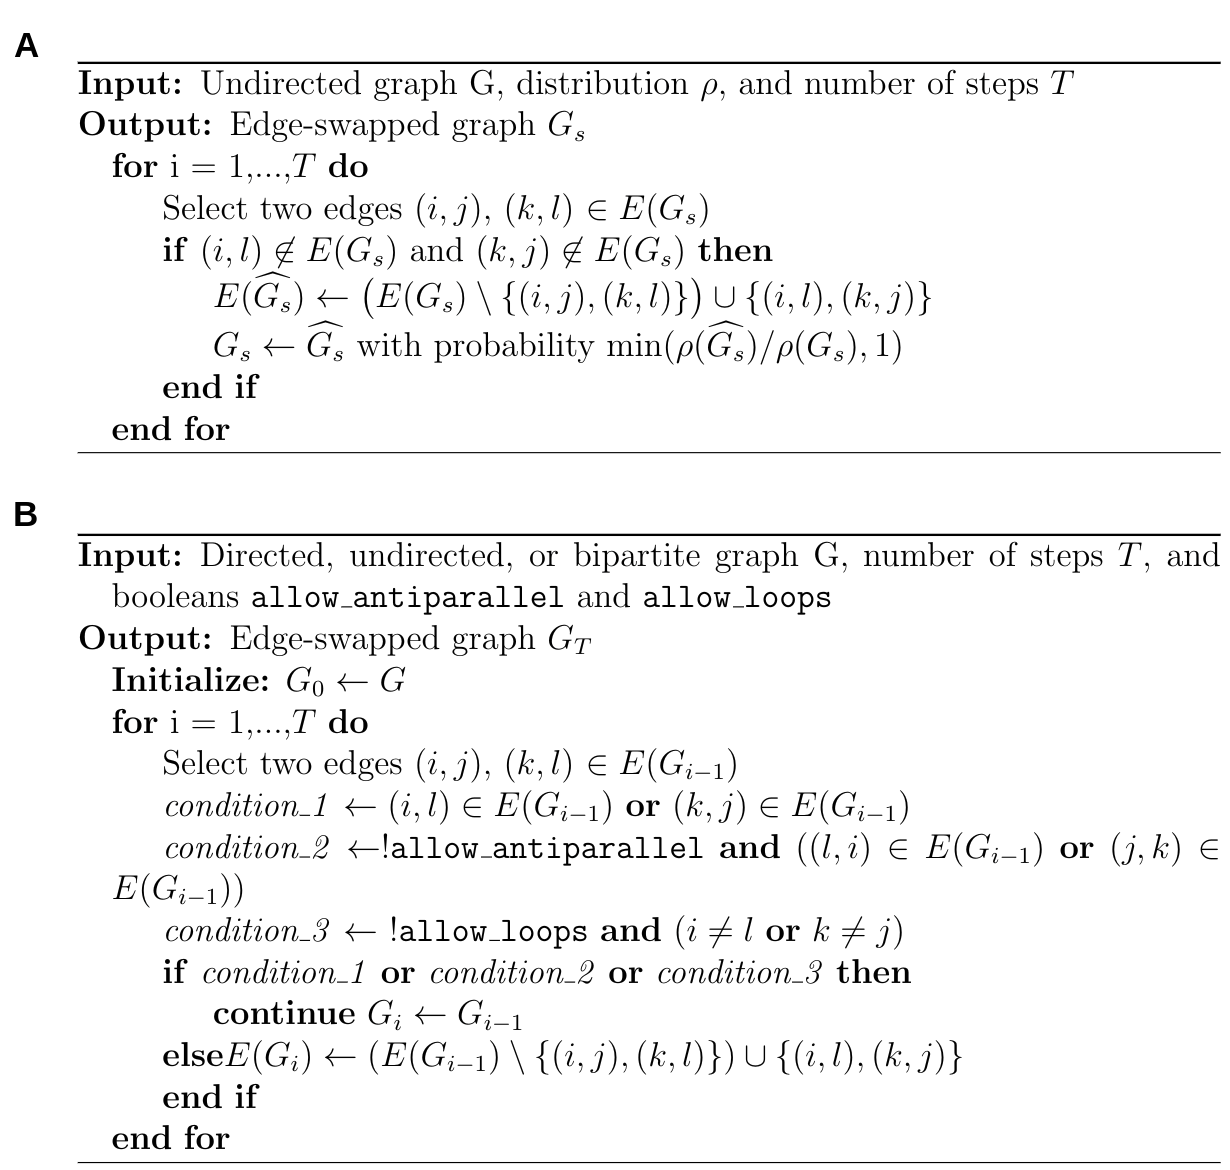 Figure 2: XSwap algorithm pseudocode. A. XSwap algorithm presented by Hanhijärvi, et al. [15]. B. Extension of the XSwap algorithm to other types of networks.